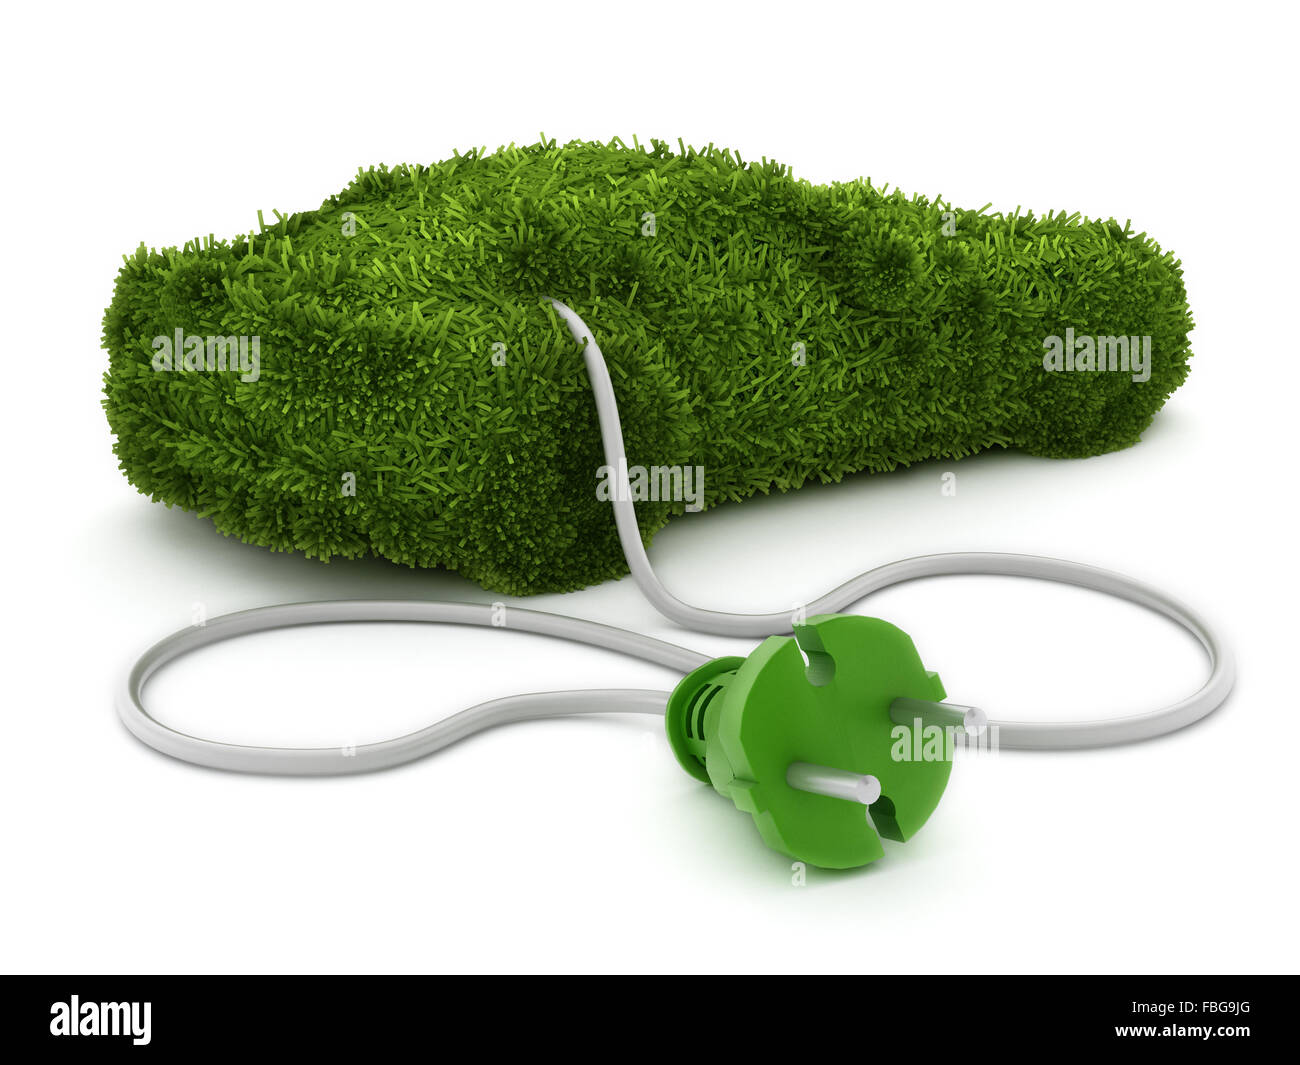 Green car covered with grass texture connected to the electric plug. Stock Photo